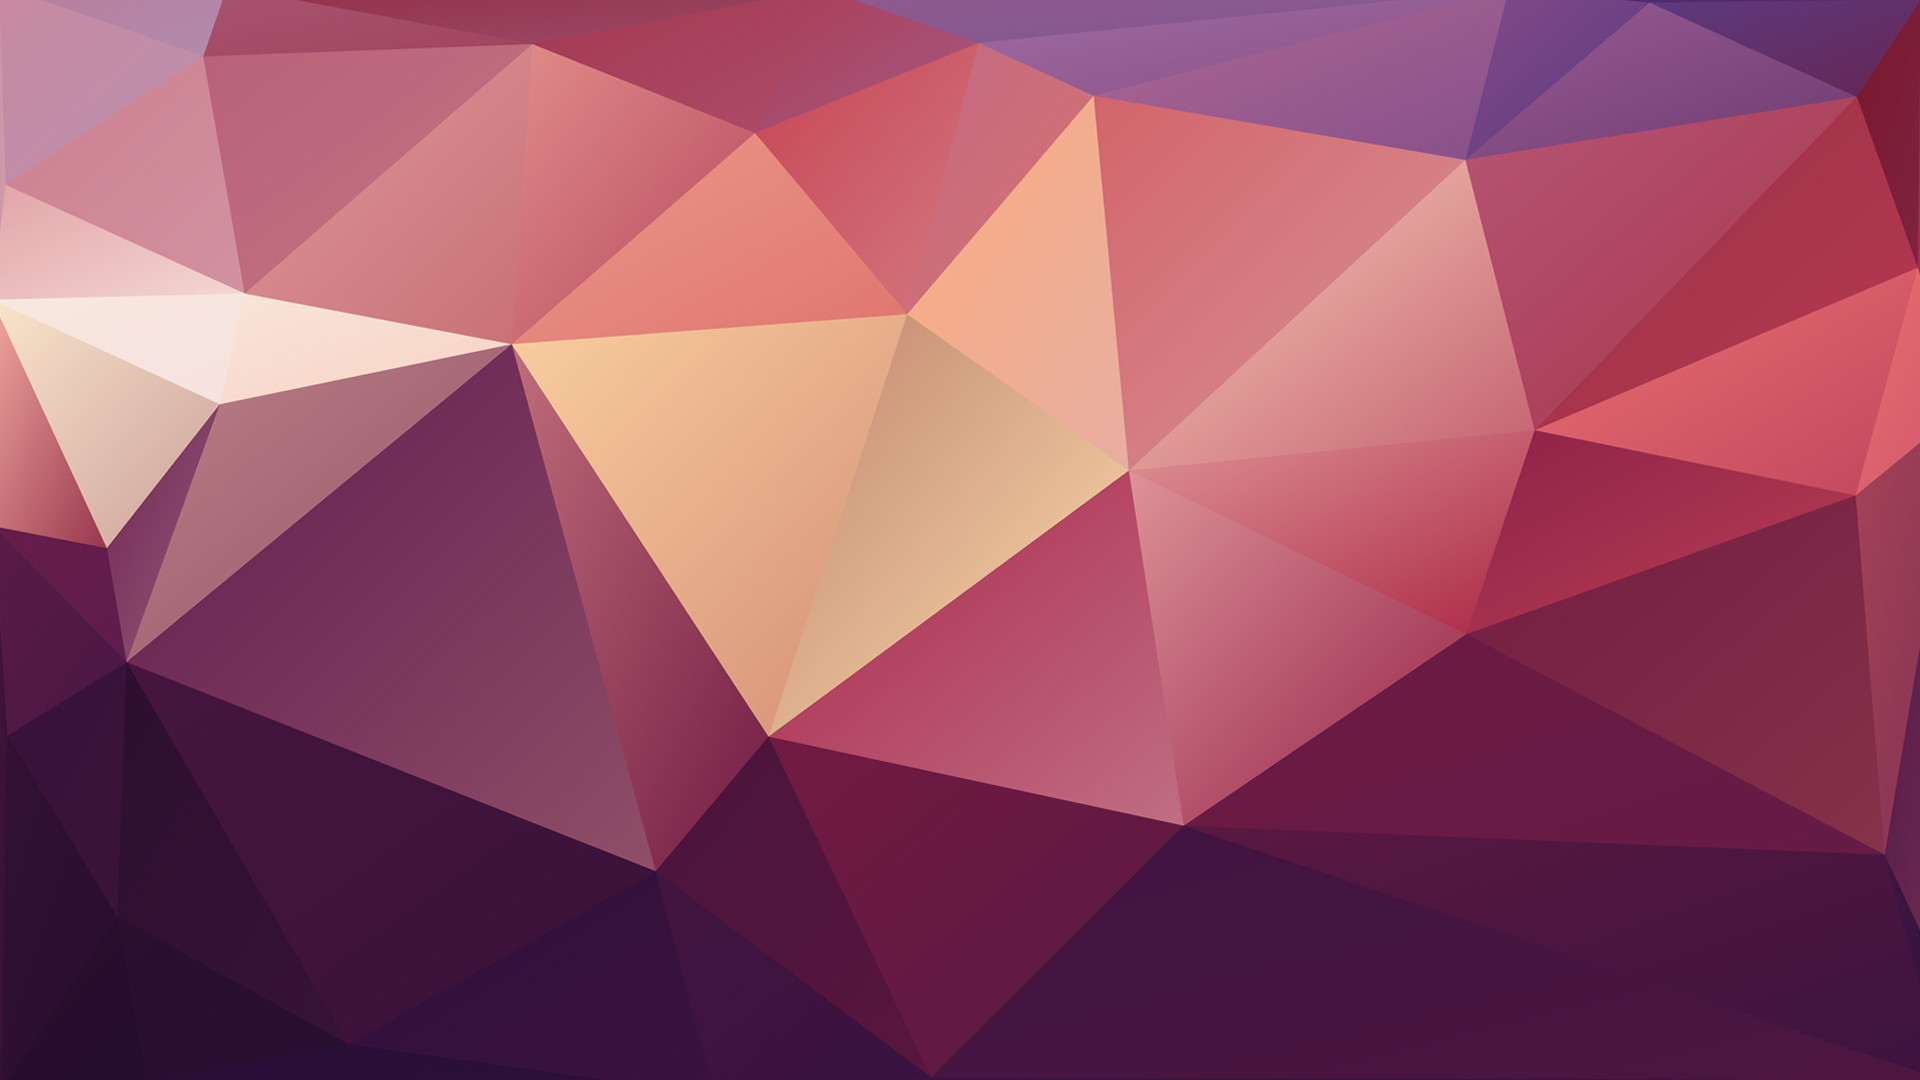 1920x1080 ... Abstract Geometric Low Poly - Wallpaper by McFrolic